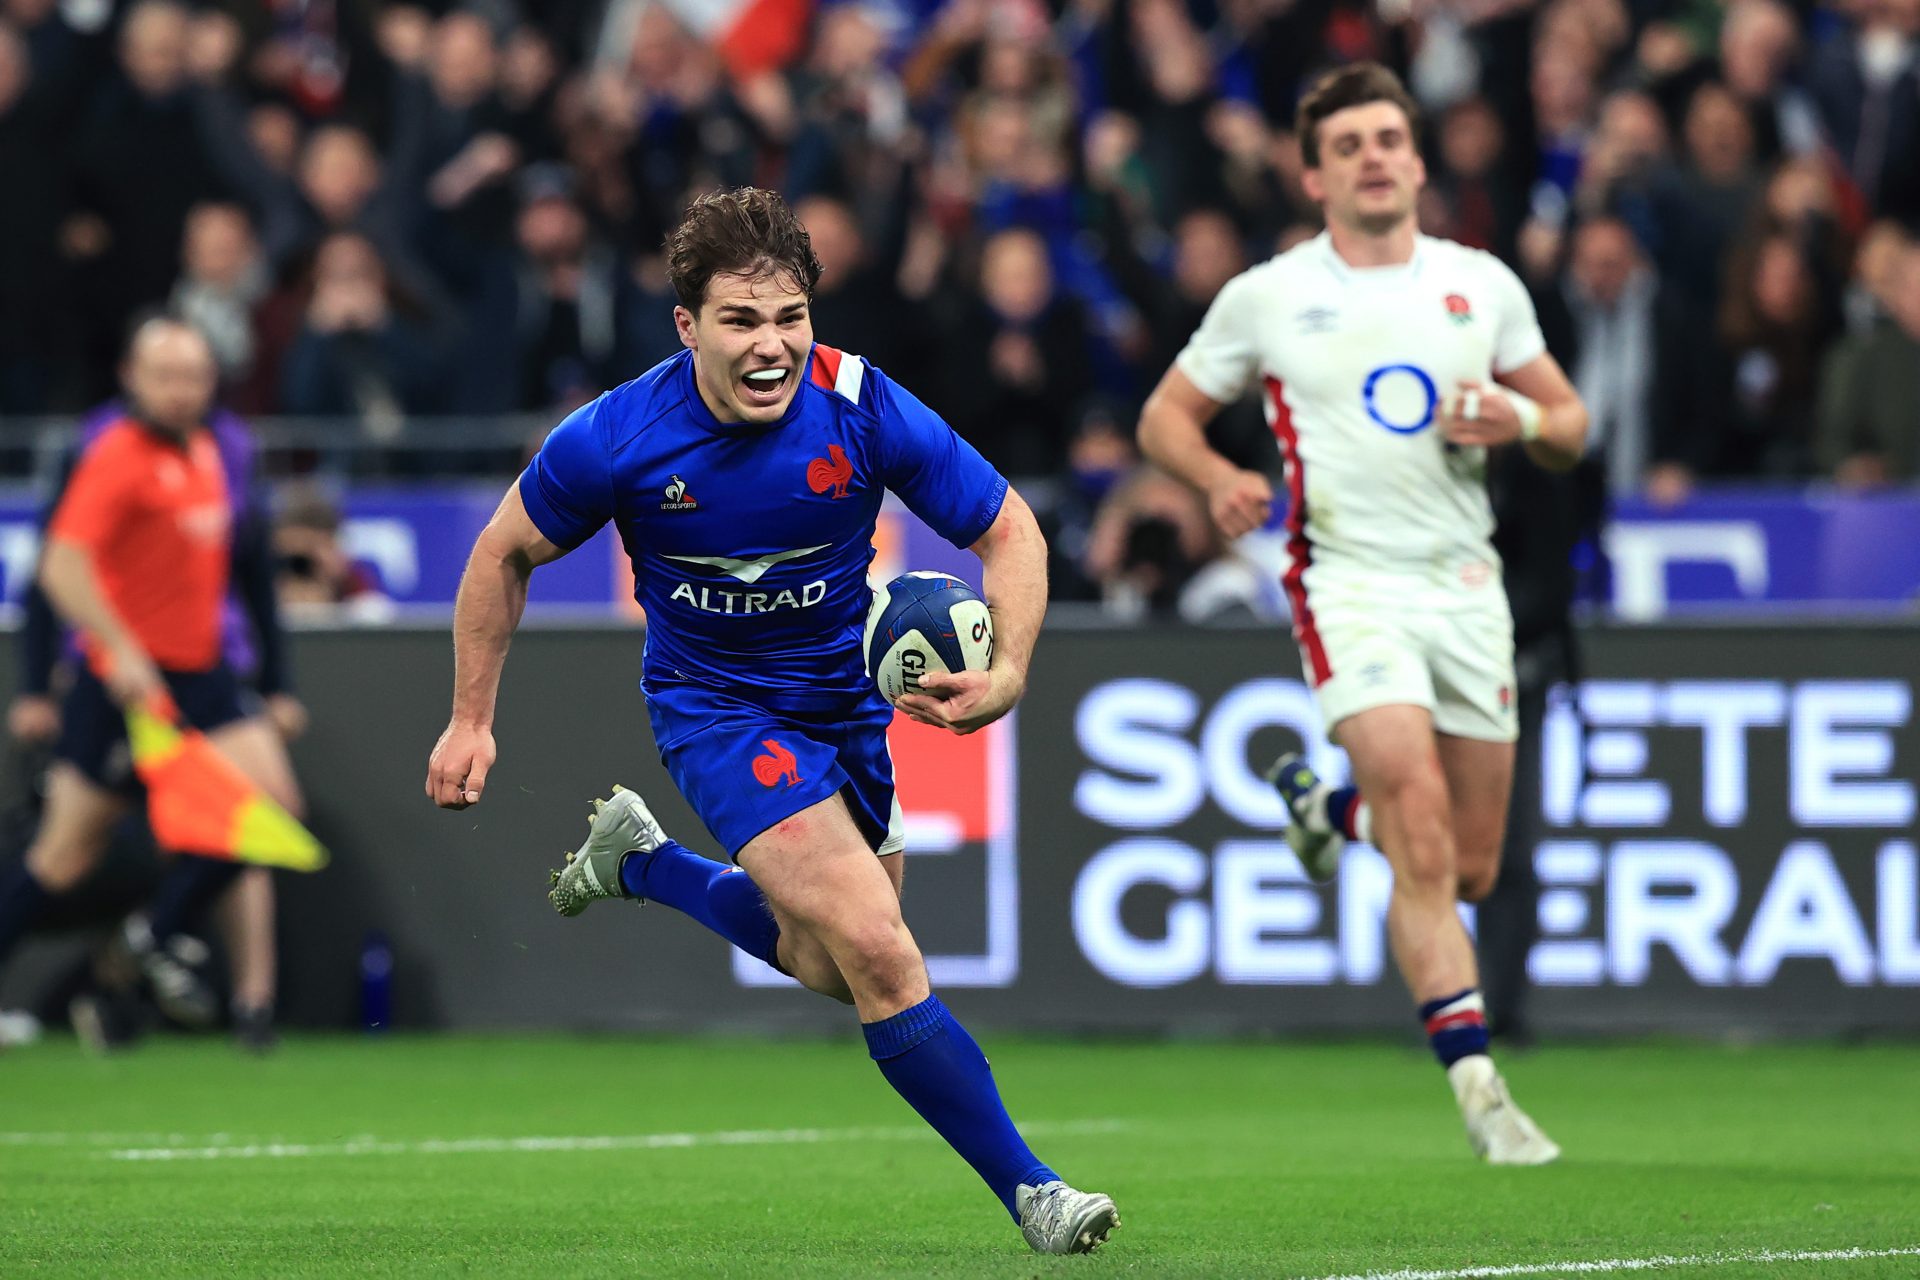 Who are the players to watch at the 2023 Rugby World Cup?